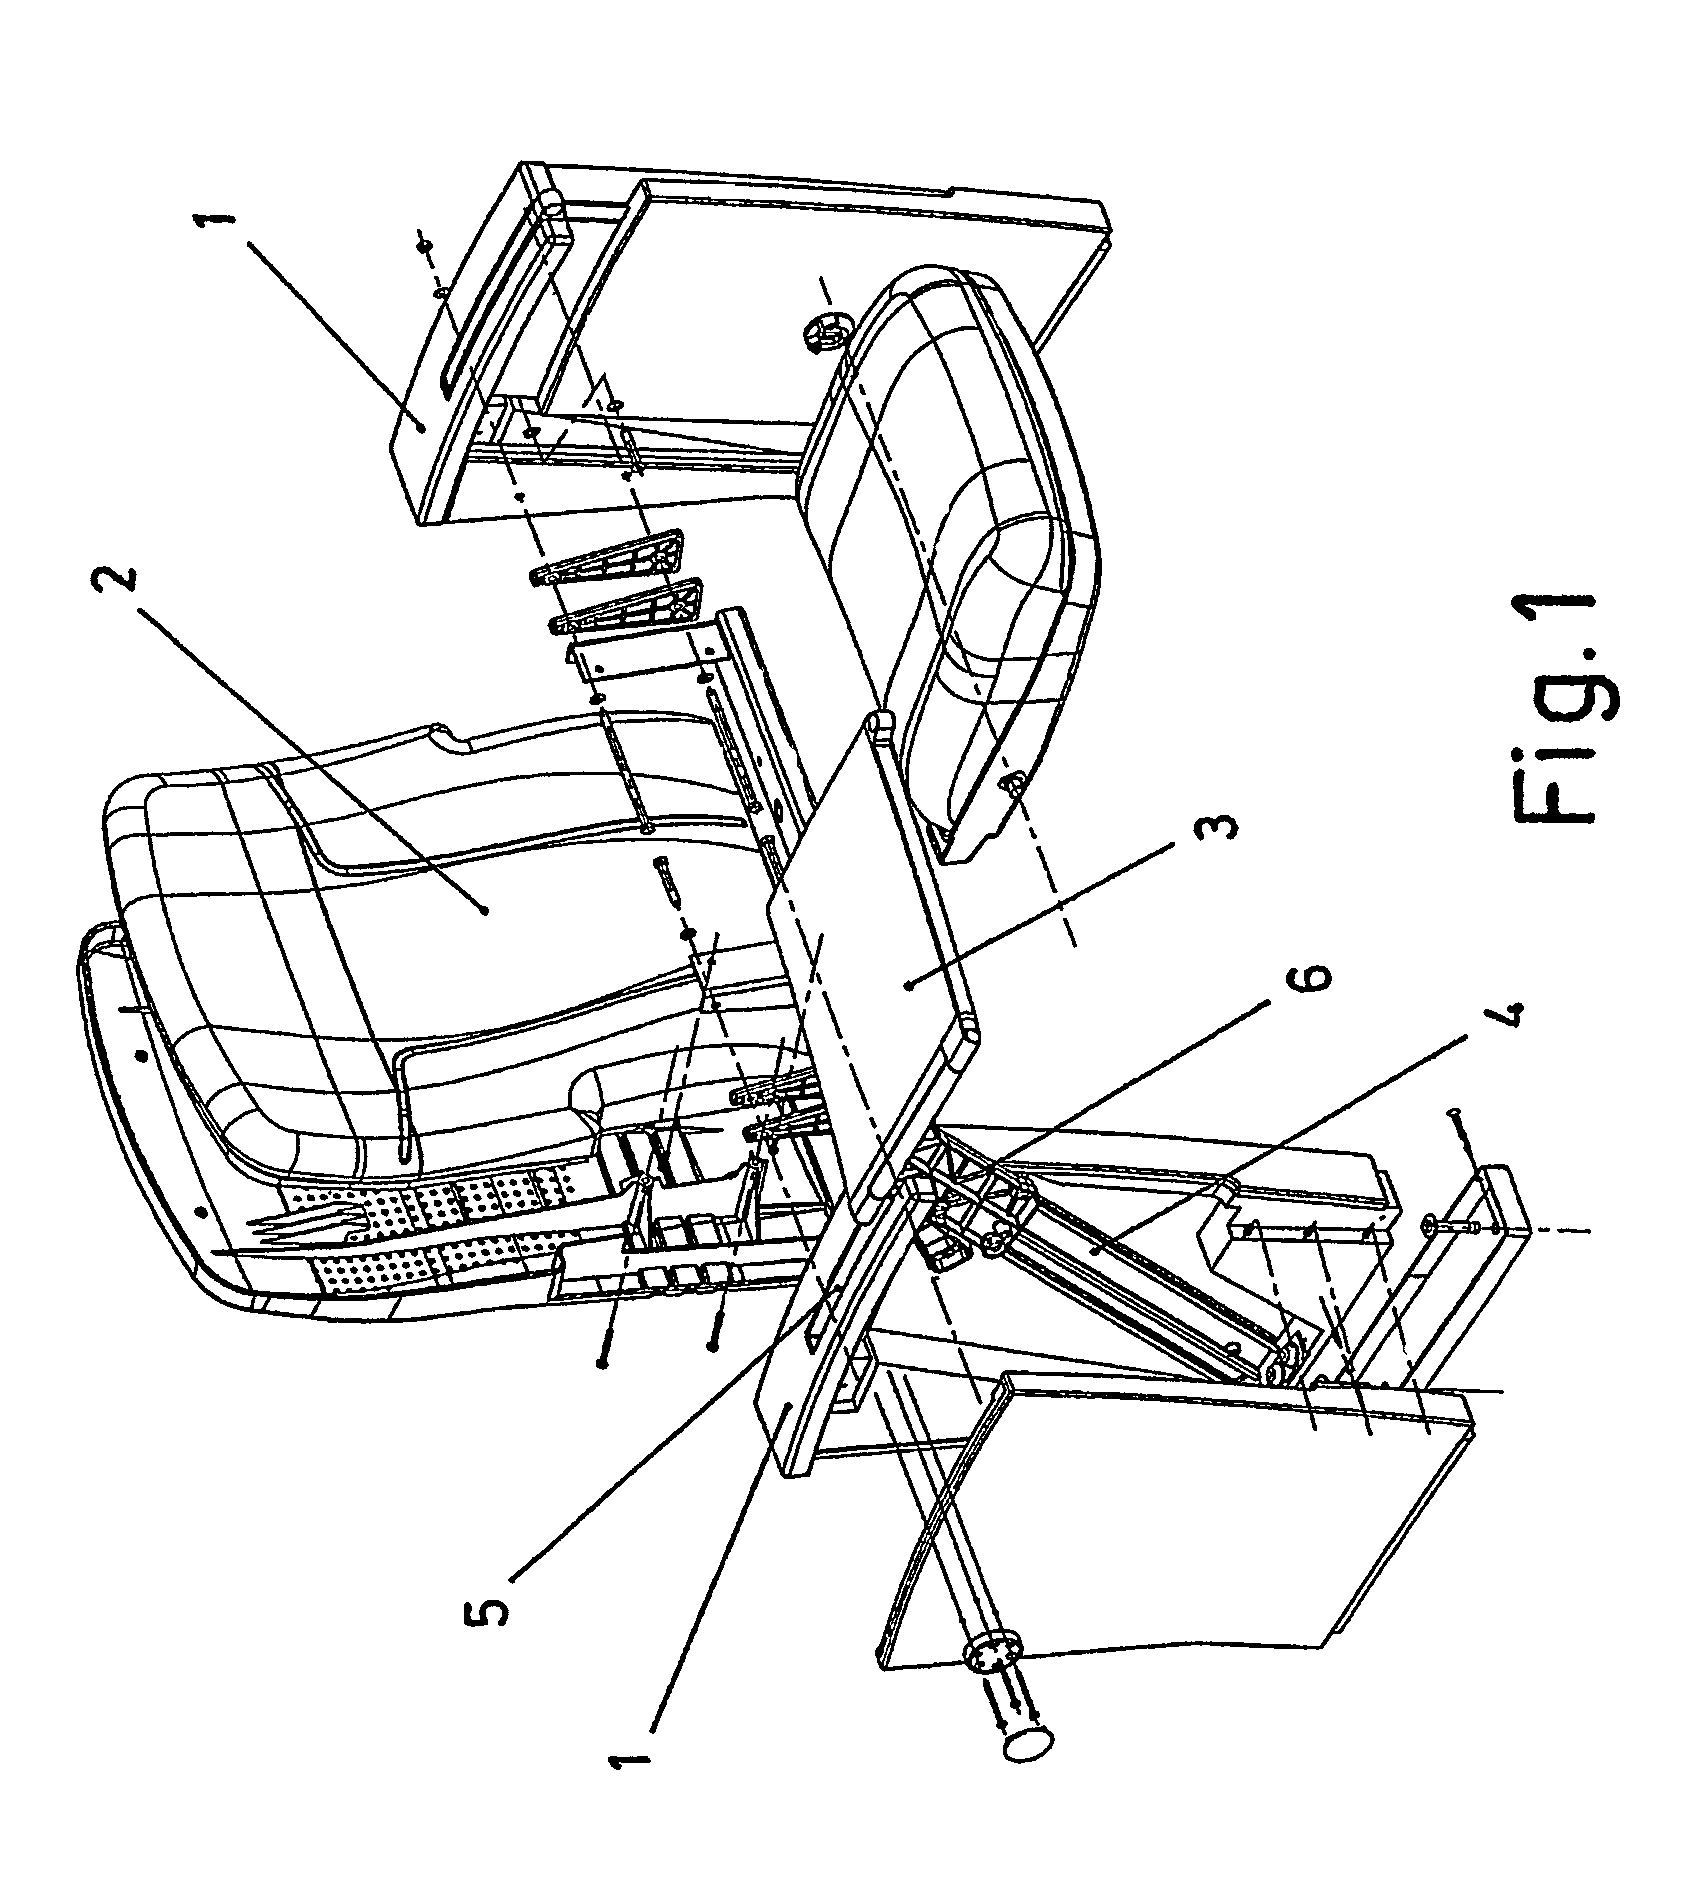 System for mounting writing tablets to armchairs